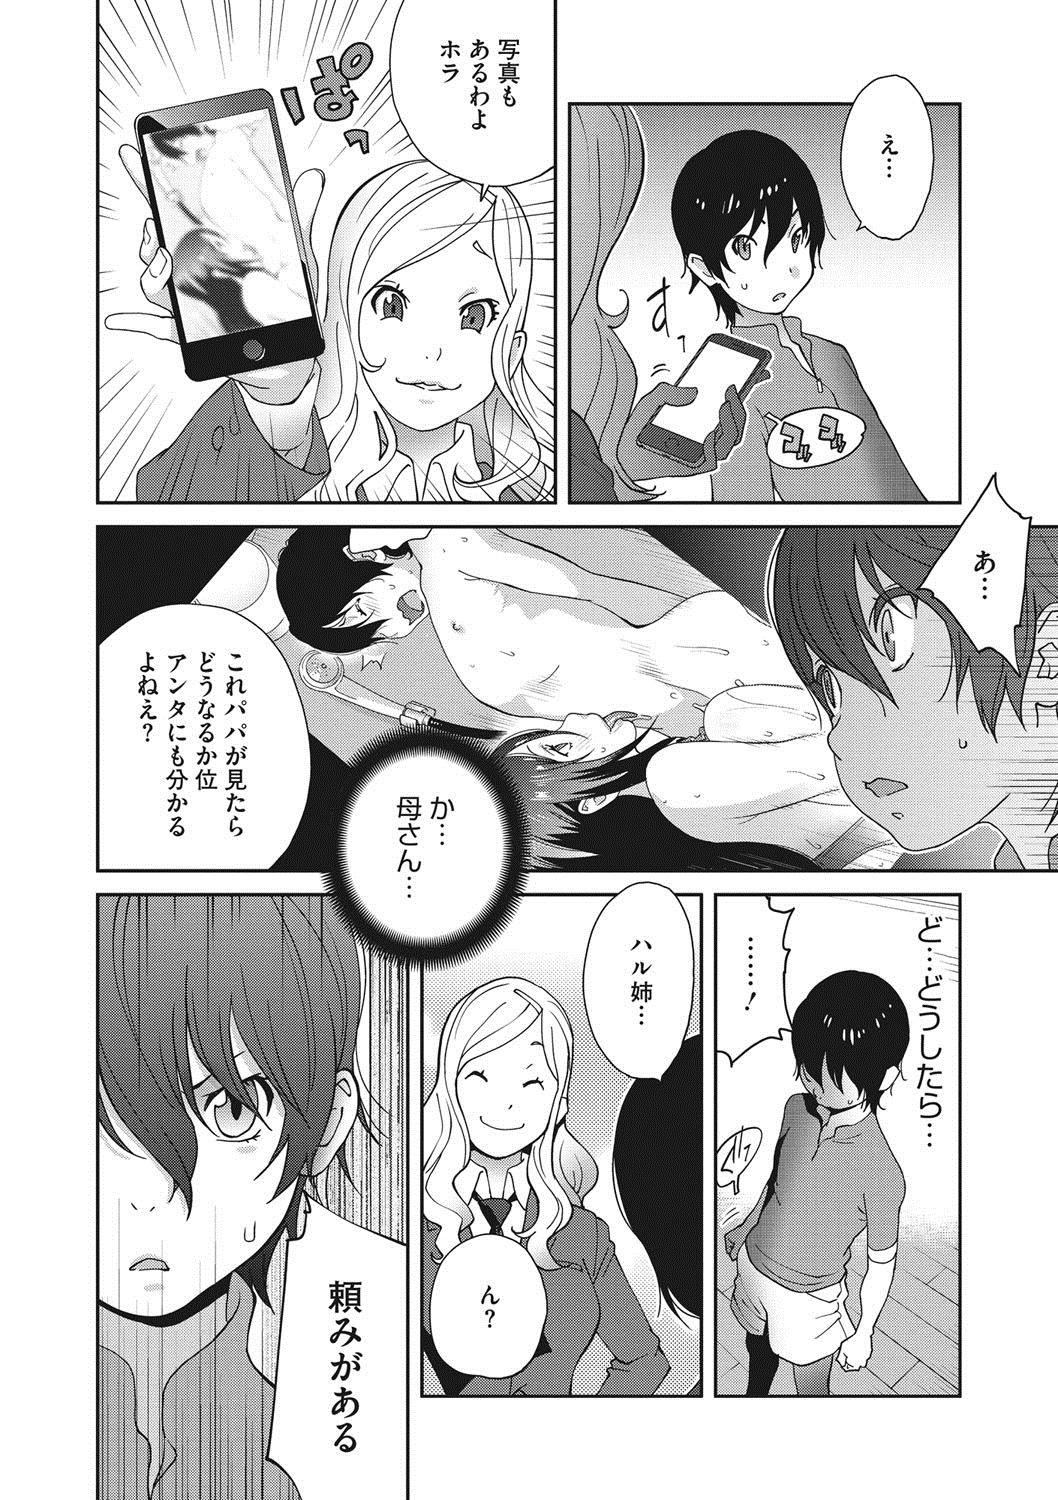 [Kotoyoshi Yumisuke] Haha to Ane to Aoi Ichigo no Fromage - Fromage of mother and an older sister and a blue strawberry Ch. 1-4 43